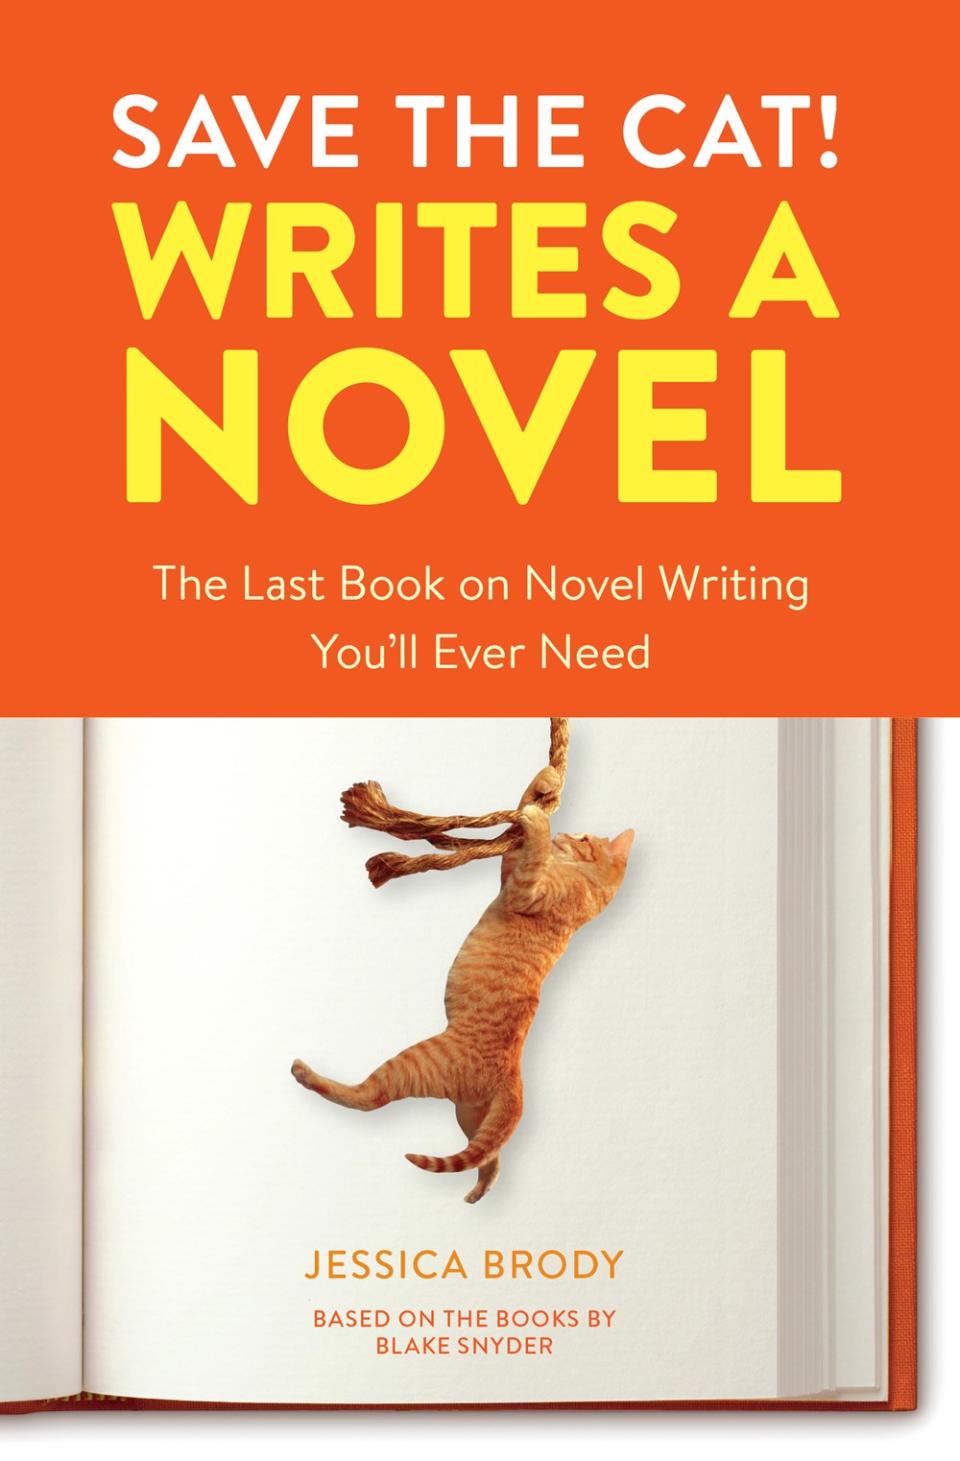 Save the Cat Writes a Novel - New Years Resolution Books